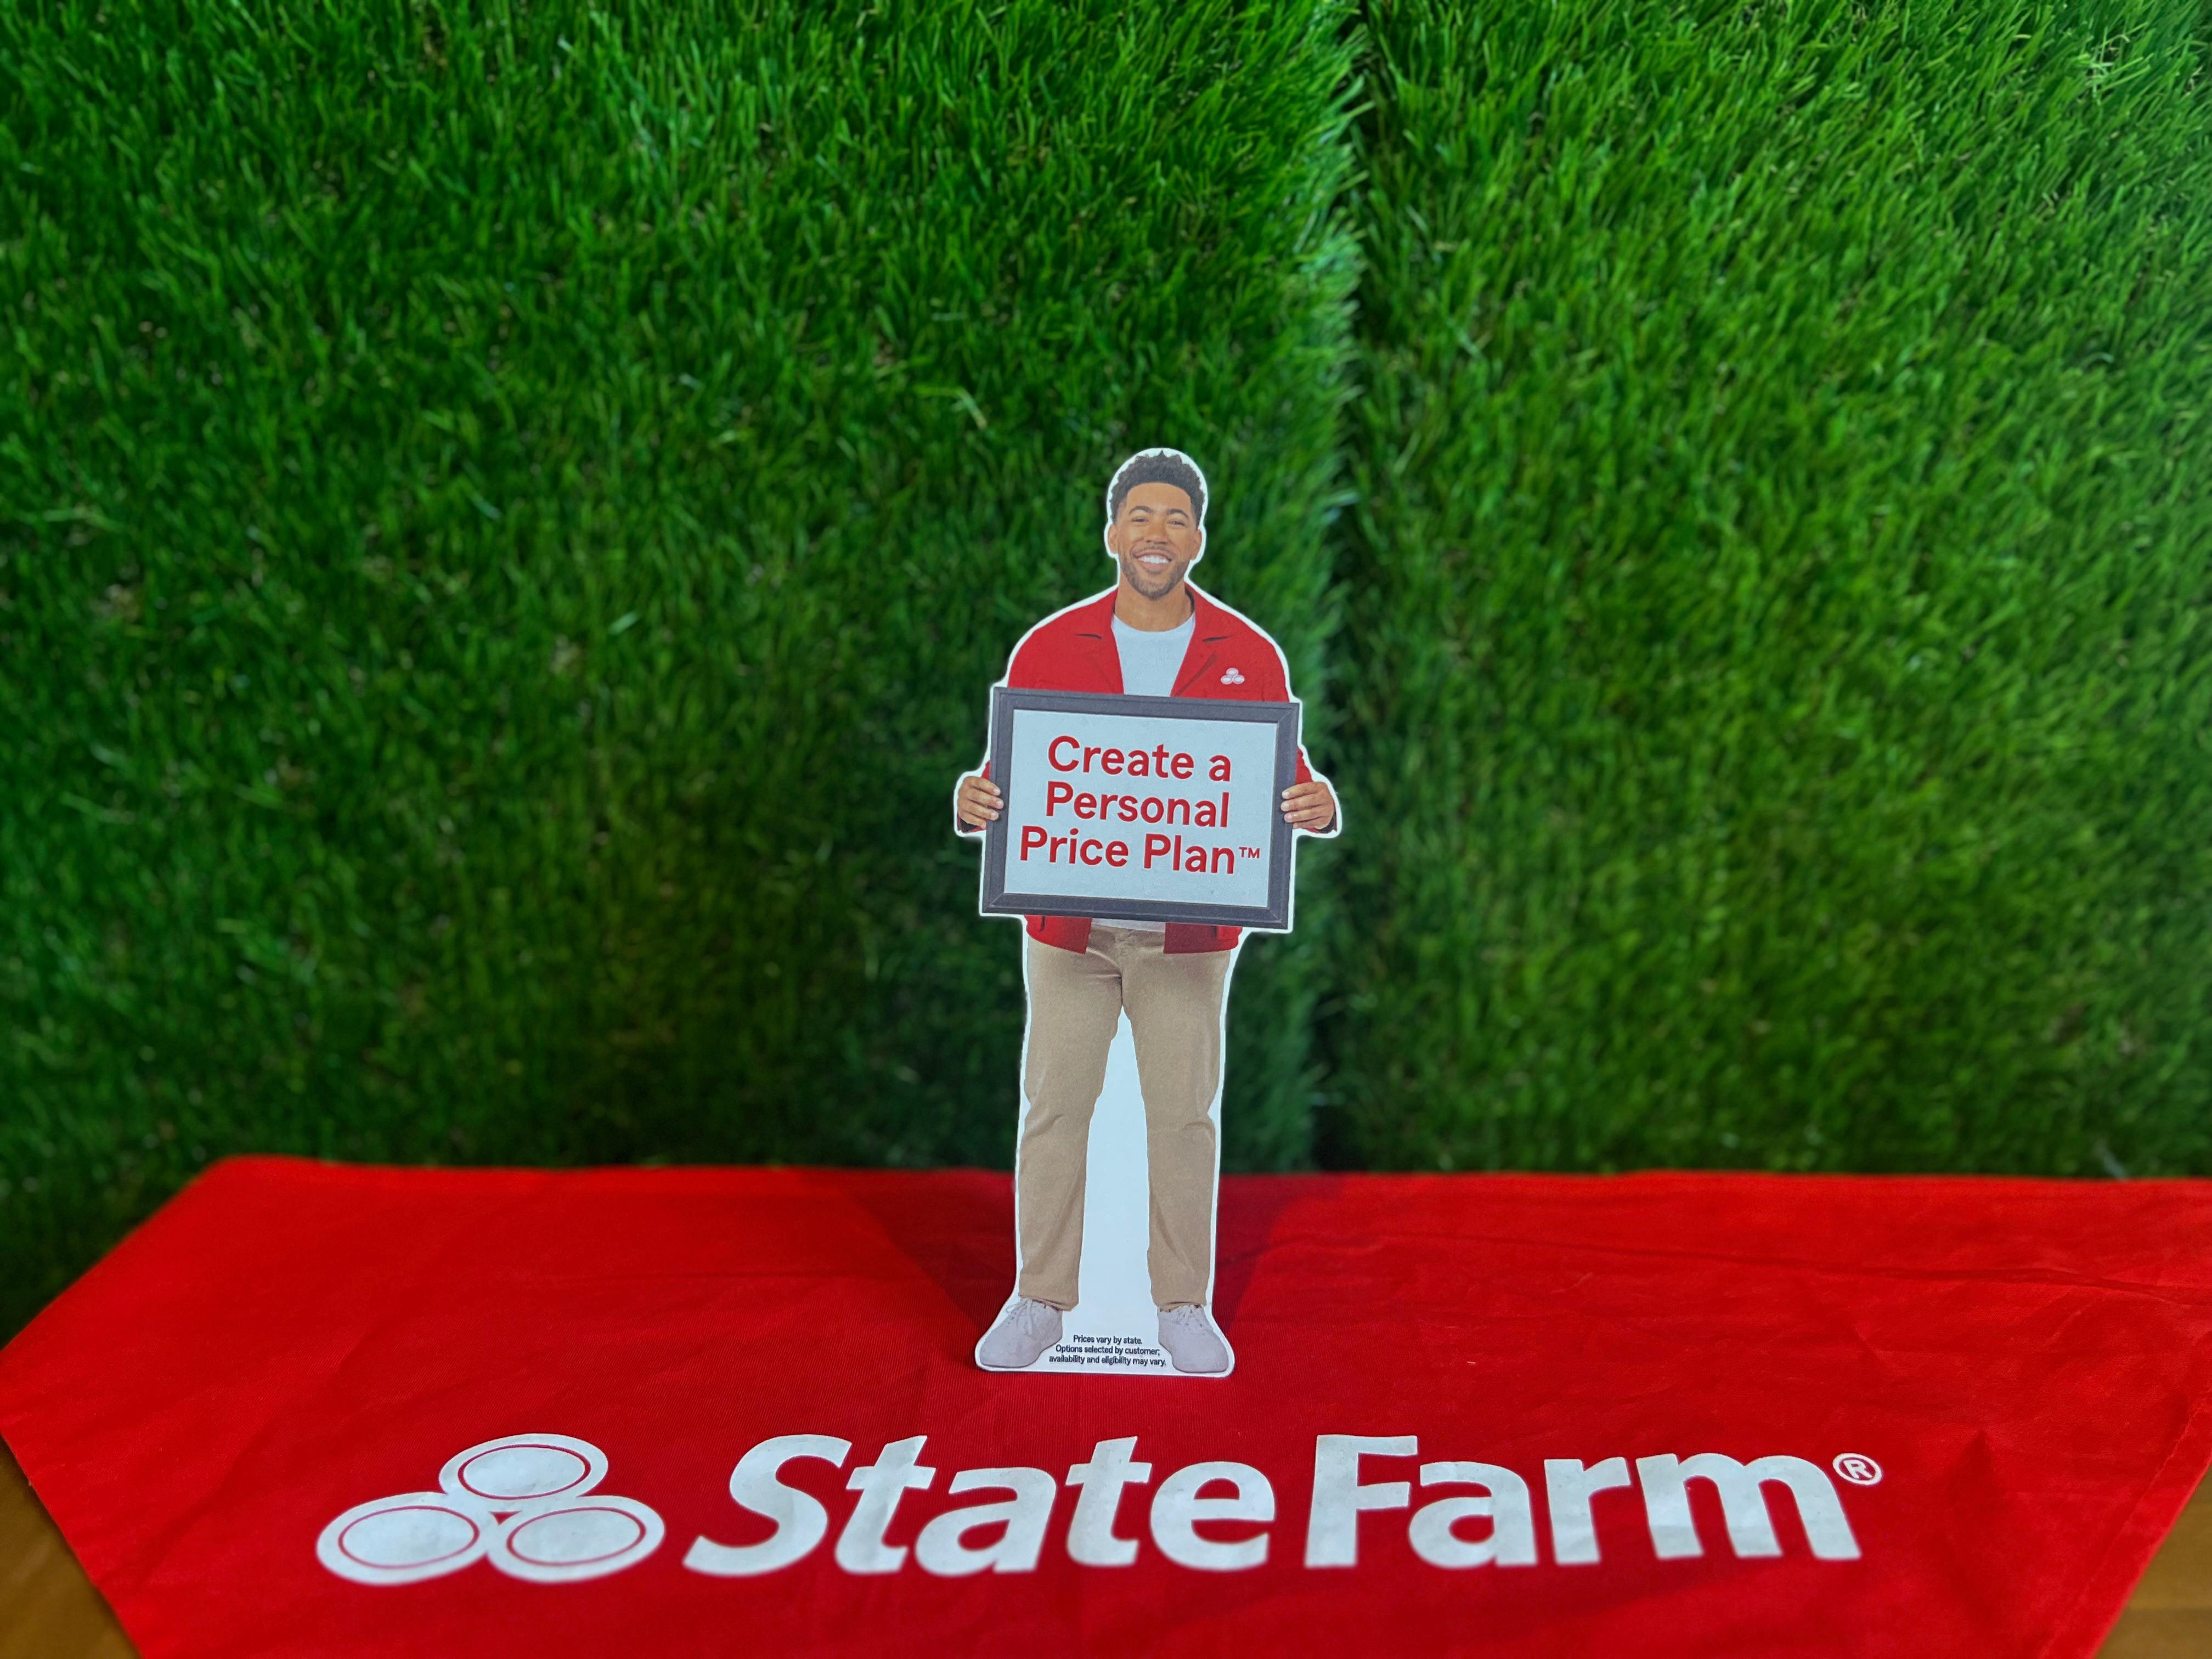 Adrian Sims - State Farm Insurance Agent